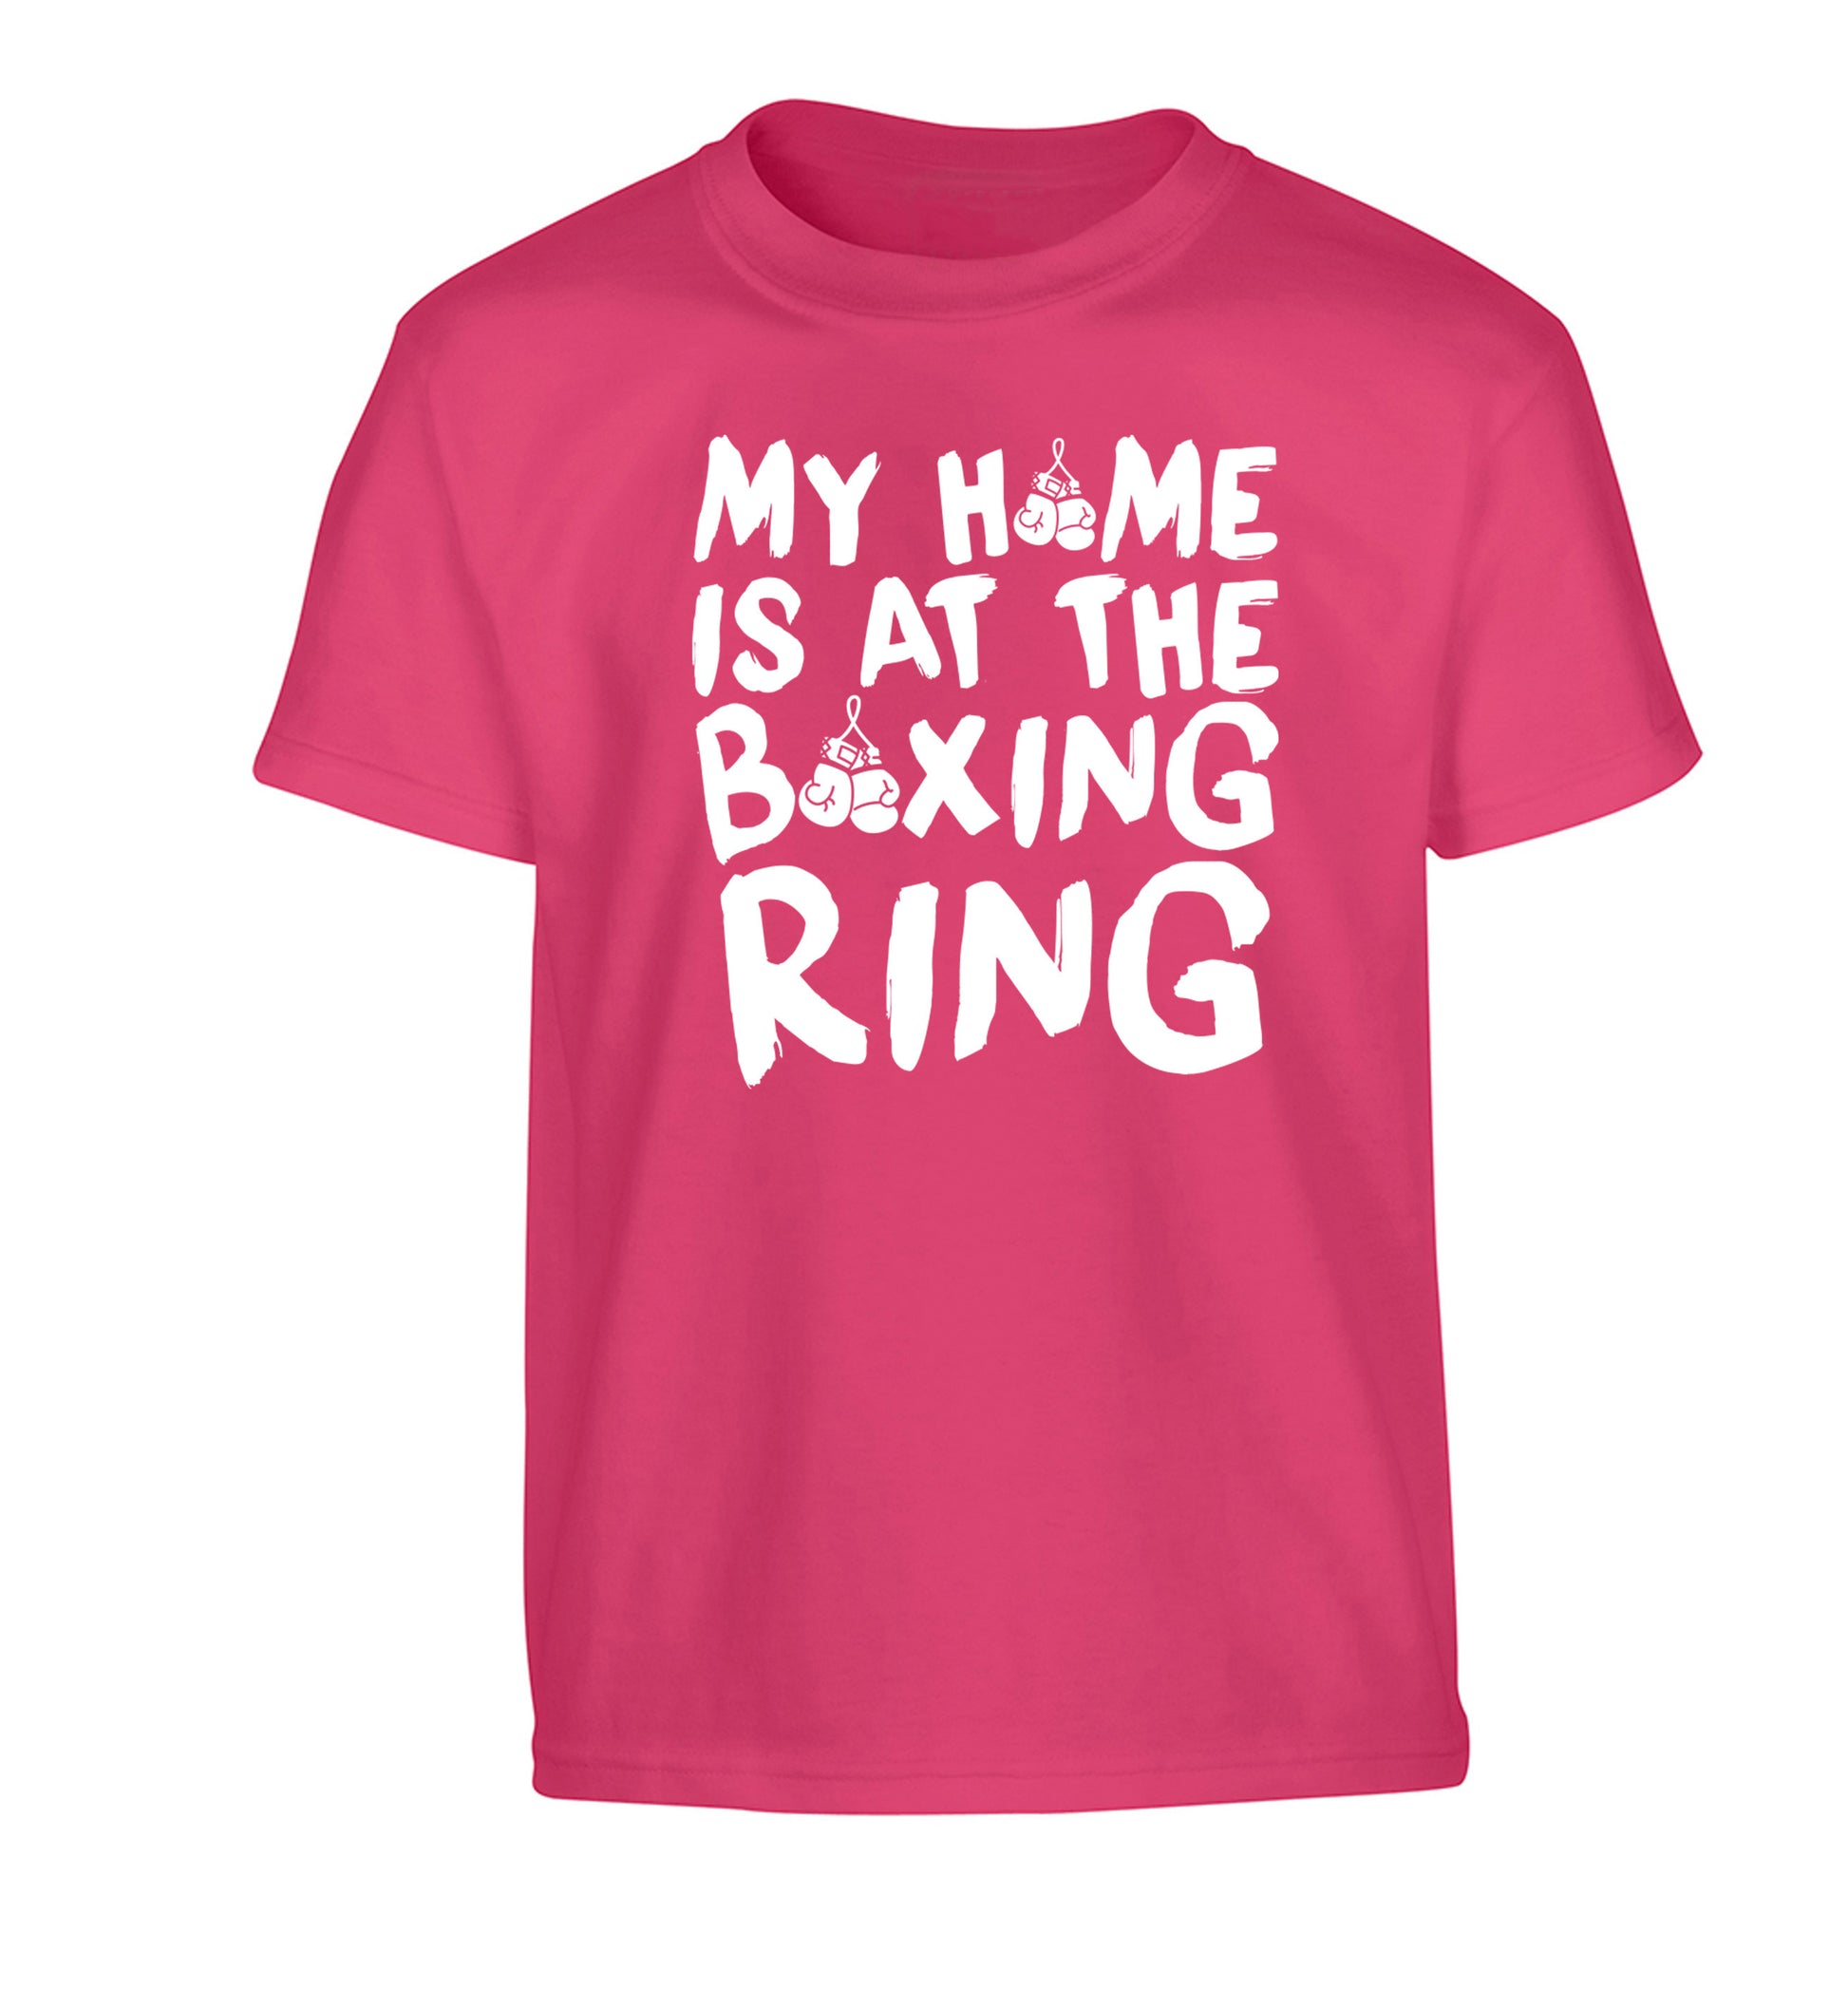 My home is at the boxing ring Children's pink Tshirt 12-14 Years